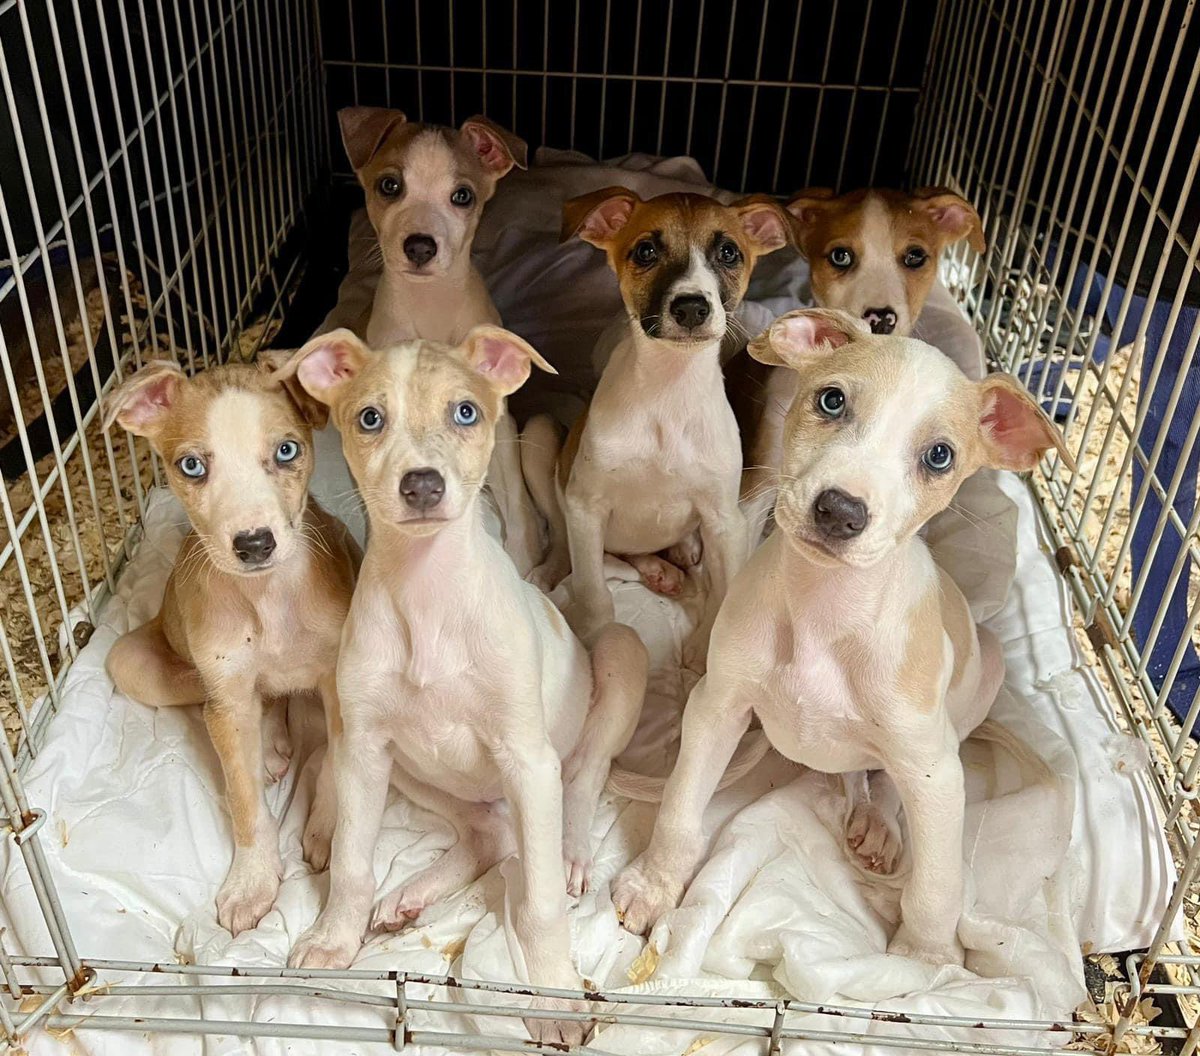 PUPPIES 💖💖💖🌟🌟🌟

6 of our 8 little guys who came into our care last week…they are seriously adorable and so cute…PUPPY LOVE 💖💖

Please donate towards these little guys, wormers, vaccinations, food, chips and general over the top 5 star care that they totally deserve